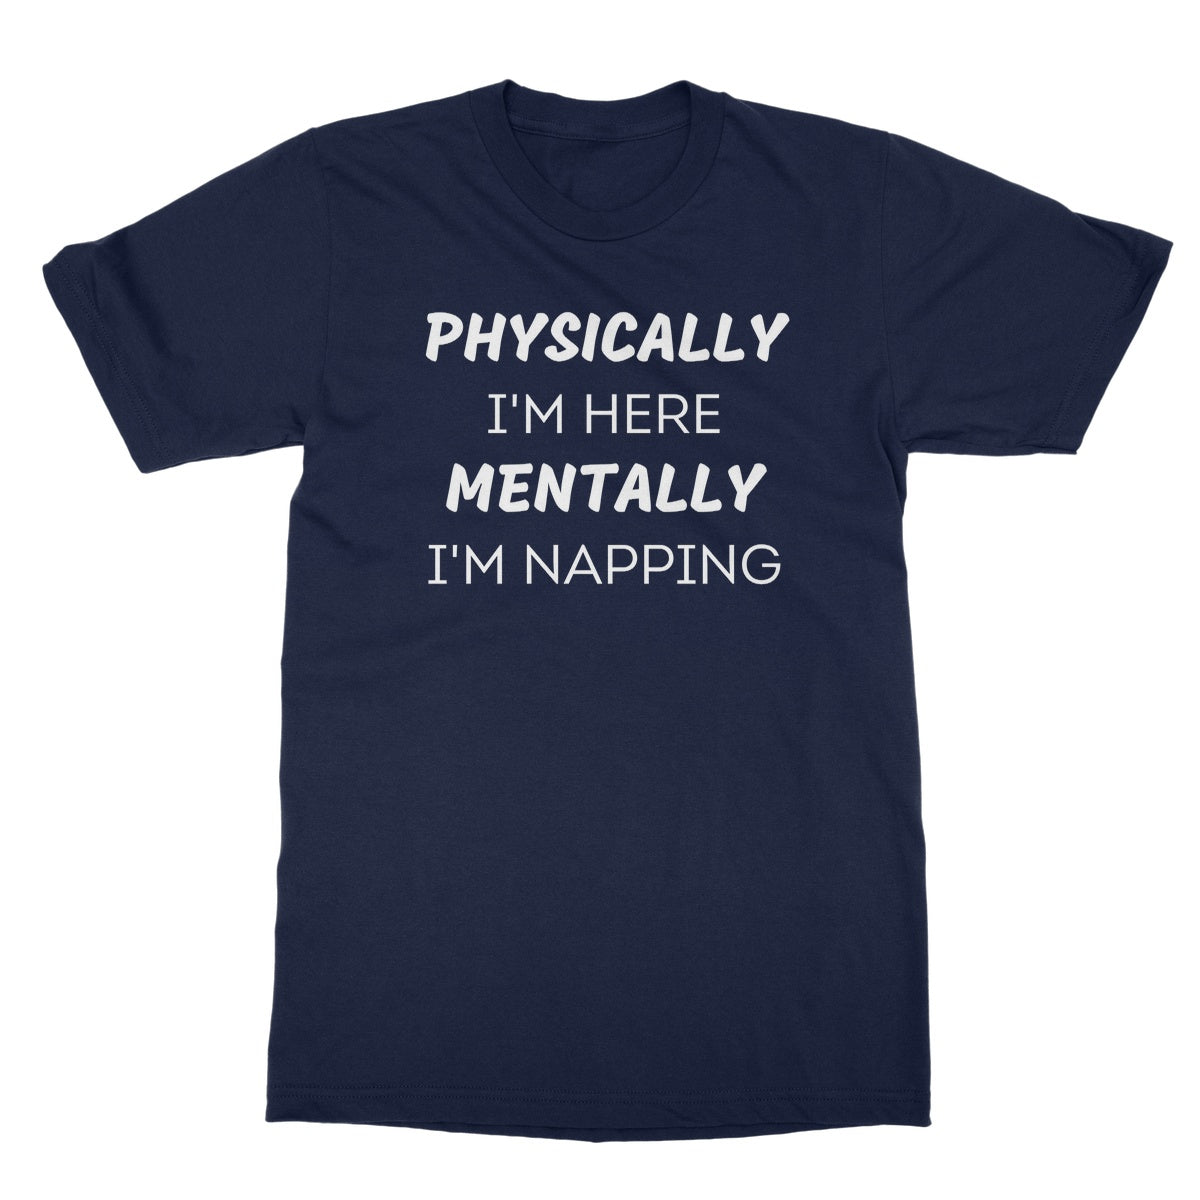 physically here mentally napping t shirt navy